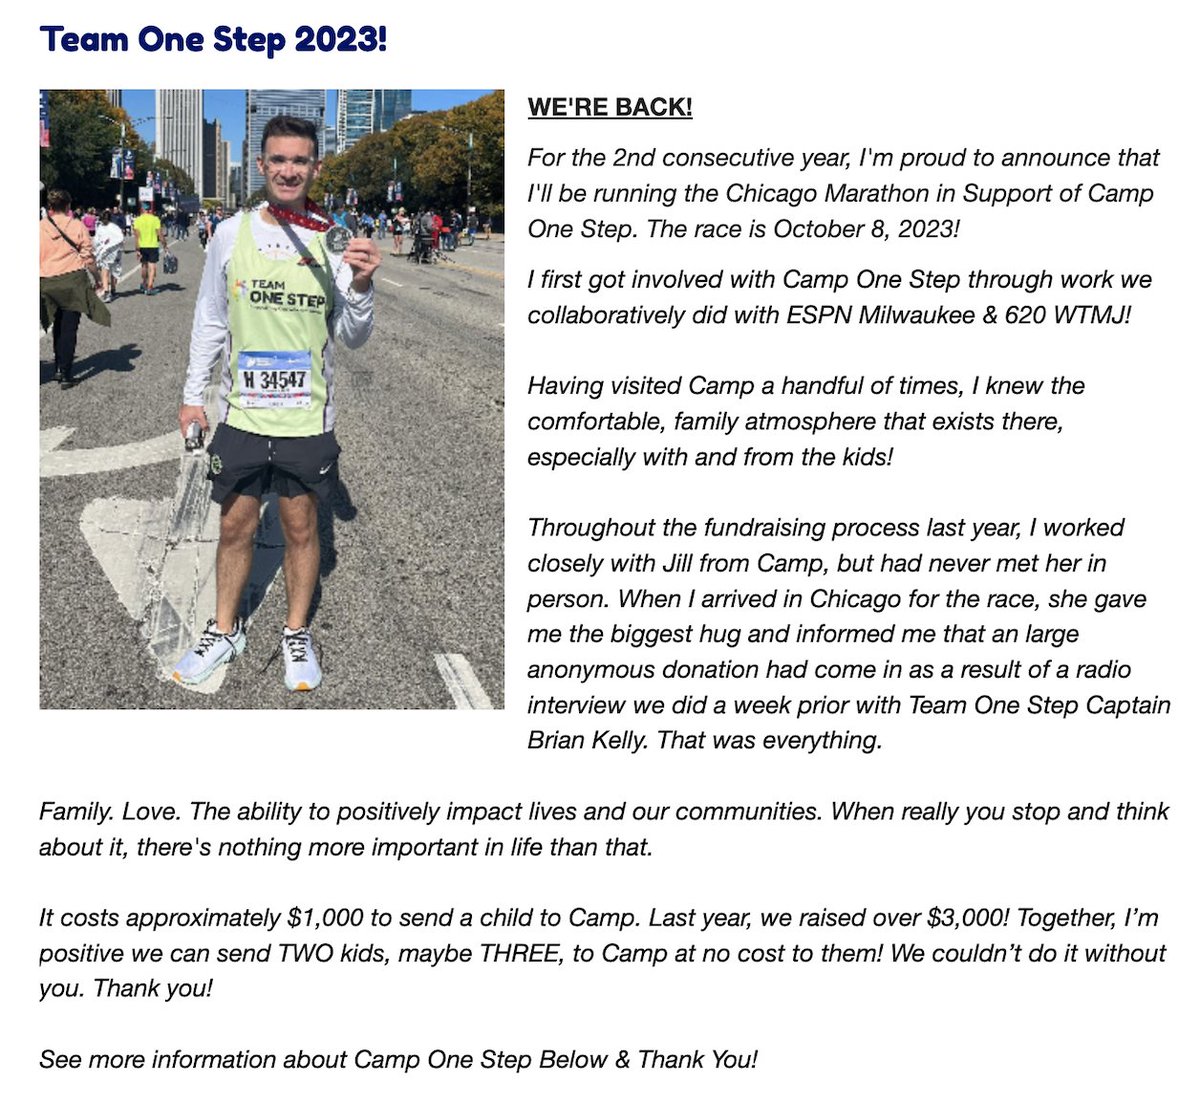 🏃‍♂️ I'm running the Chicago Marathon on October 8th! 🧀 The Pack are running Chicago this weekend. 💚 Spread the Love. 🔟 Make a $10 donation. 💰 I'll donate $10 for every point the Pack scores this weekend. Need 50 from ya, @jordan3love. Donate: rb.gy/xeleg